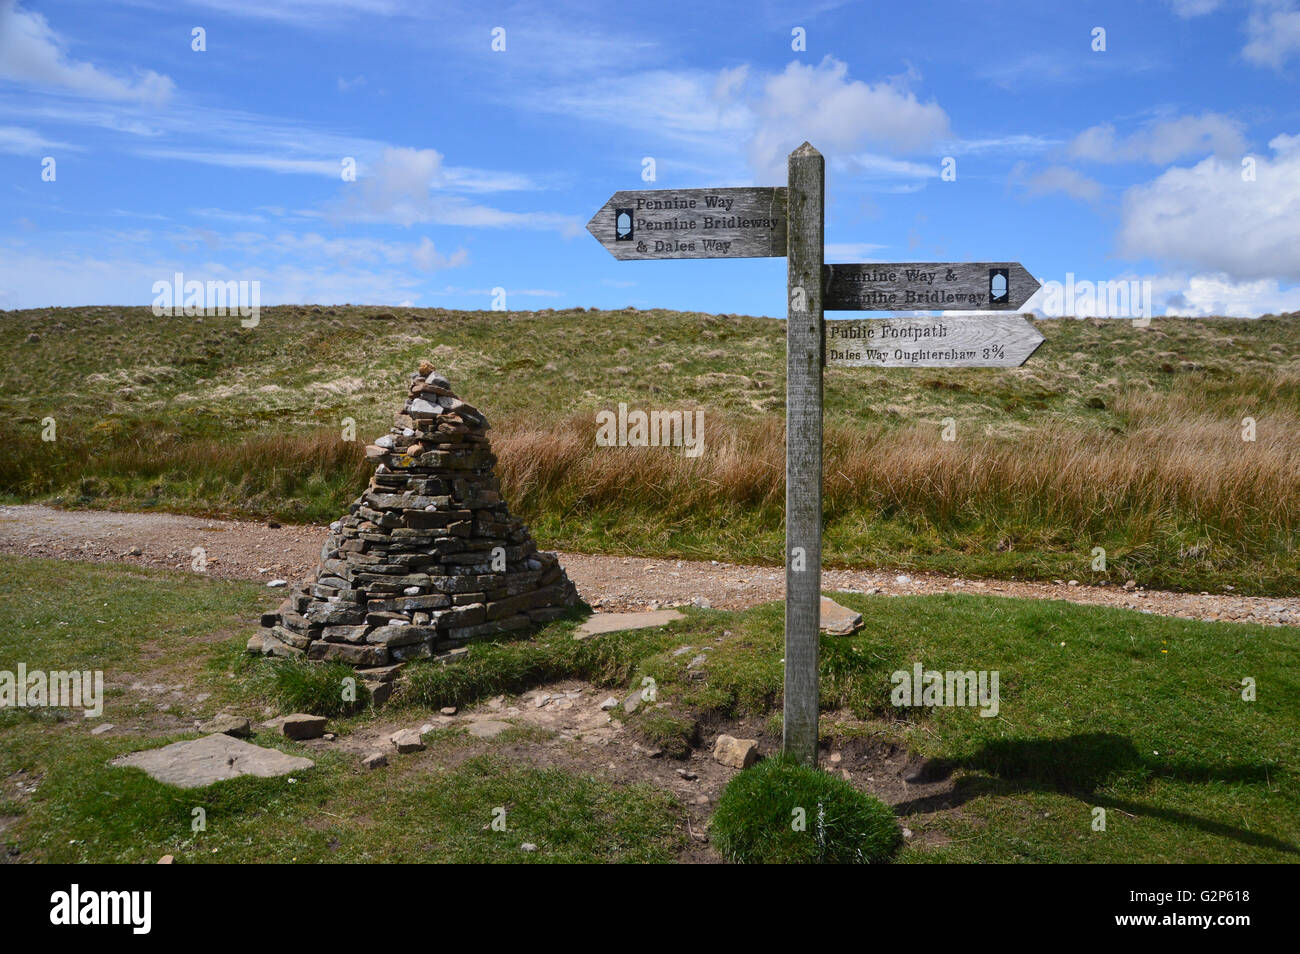 The Path Junction of the Pennine Way & Dales Way at Cam End, Upper Ribblesdale in the Yorkshire Dales, England UK. Stock Photo